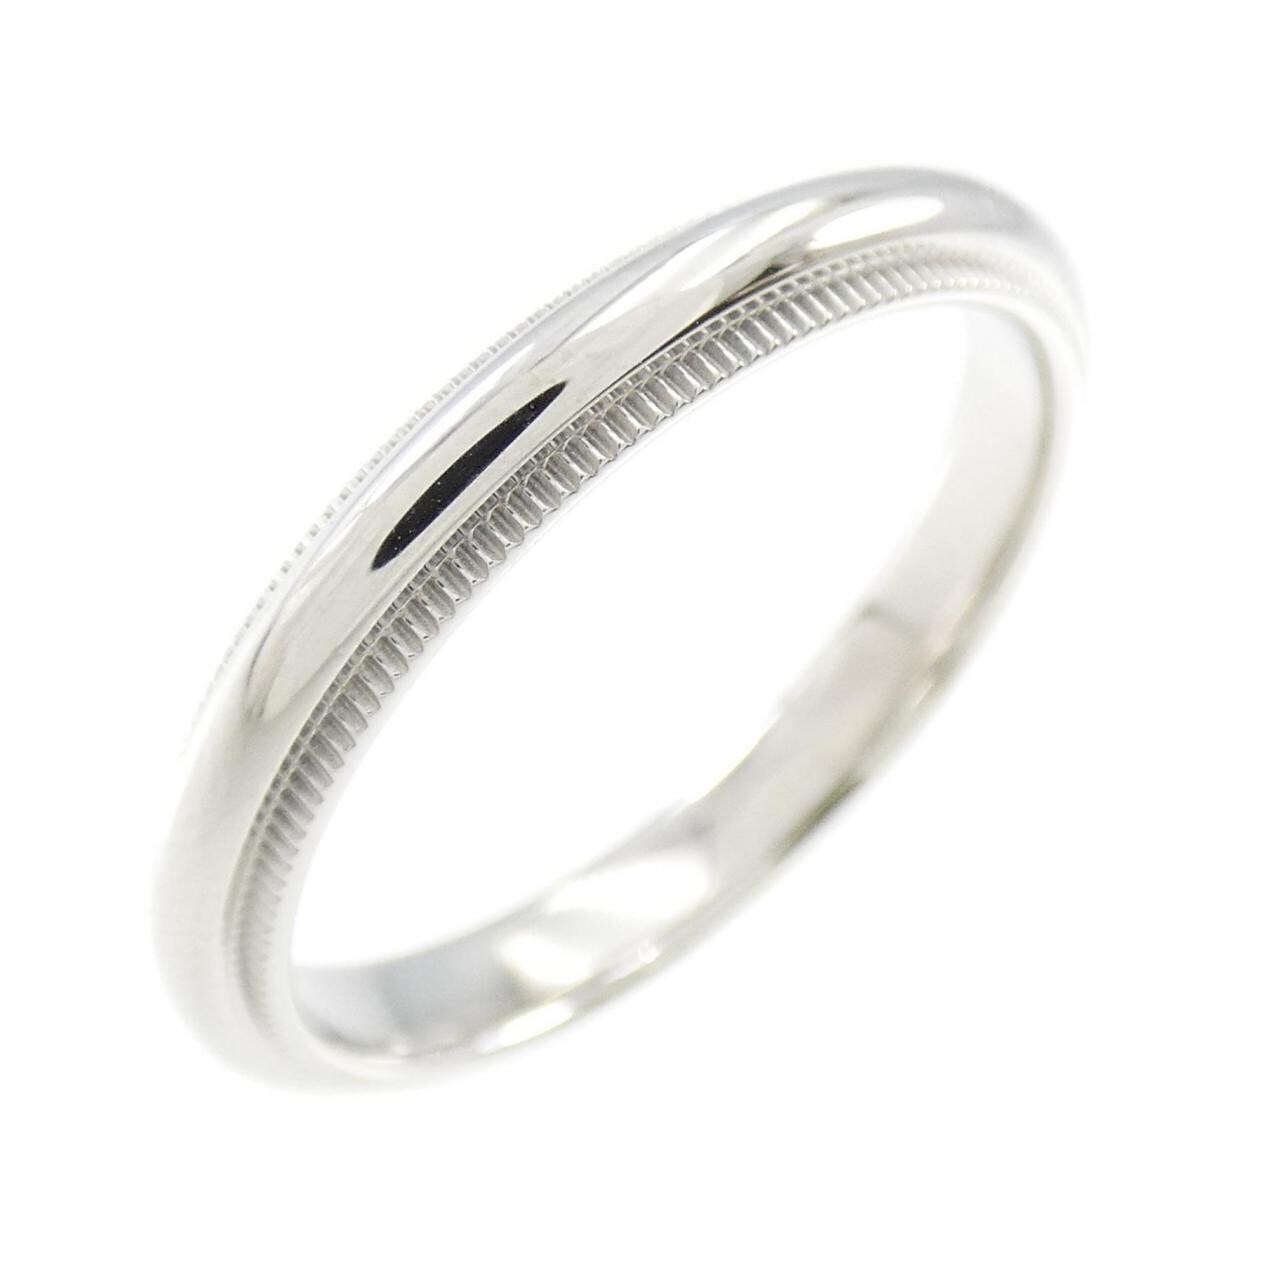 Tiffany & Co. 6mm Tiffany Together Double Milgrain Band Ring Platinum Size 8